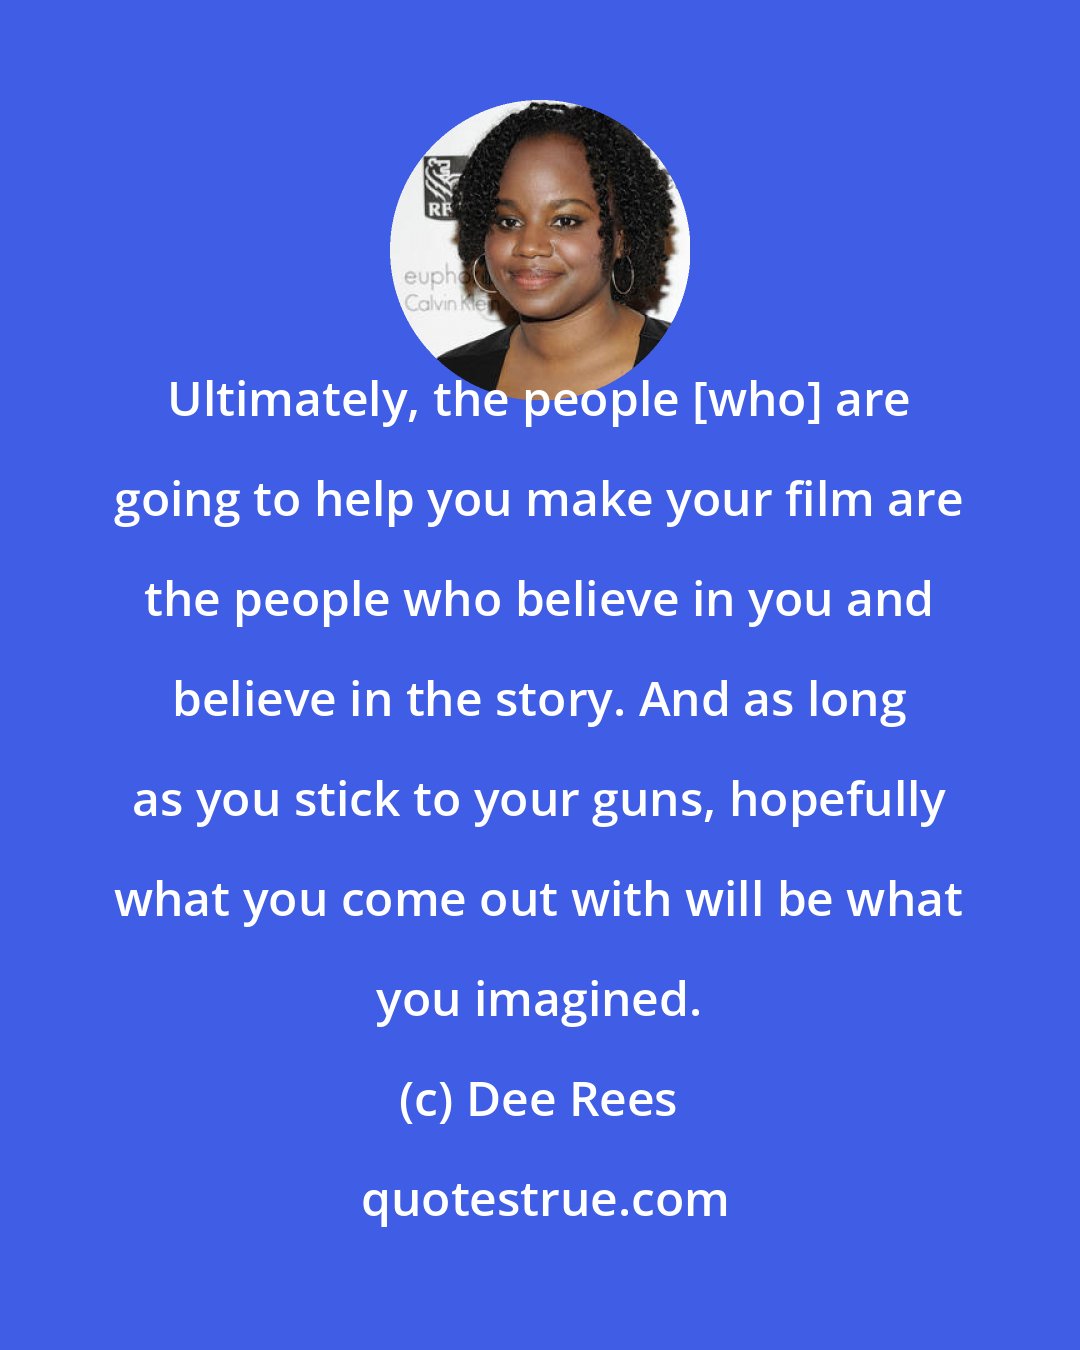 Dee Rees: Ultimately, the people [who] are going to help you make your film are the people who believe in you and believe in the story. And as long as you stick to your guns, hopefully what you come out with will be what you imagined.